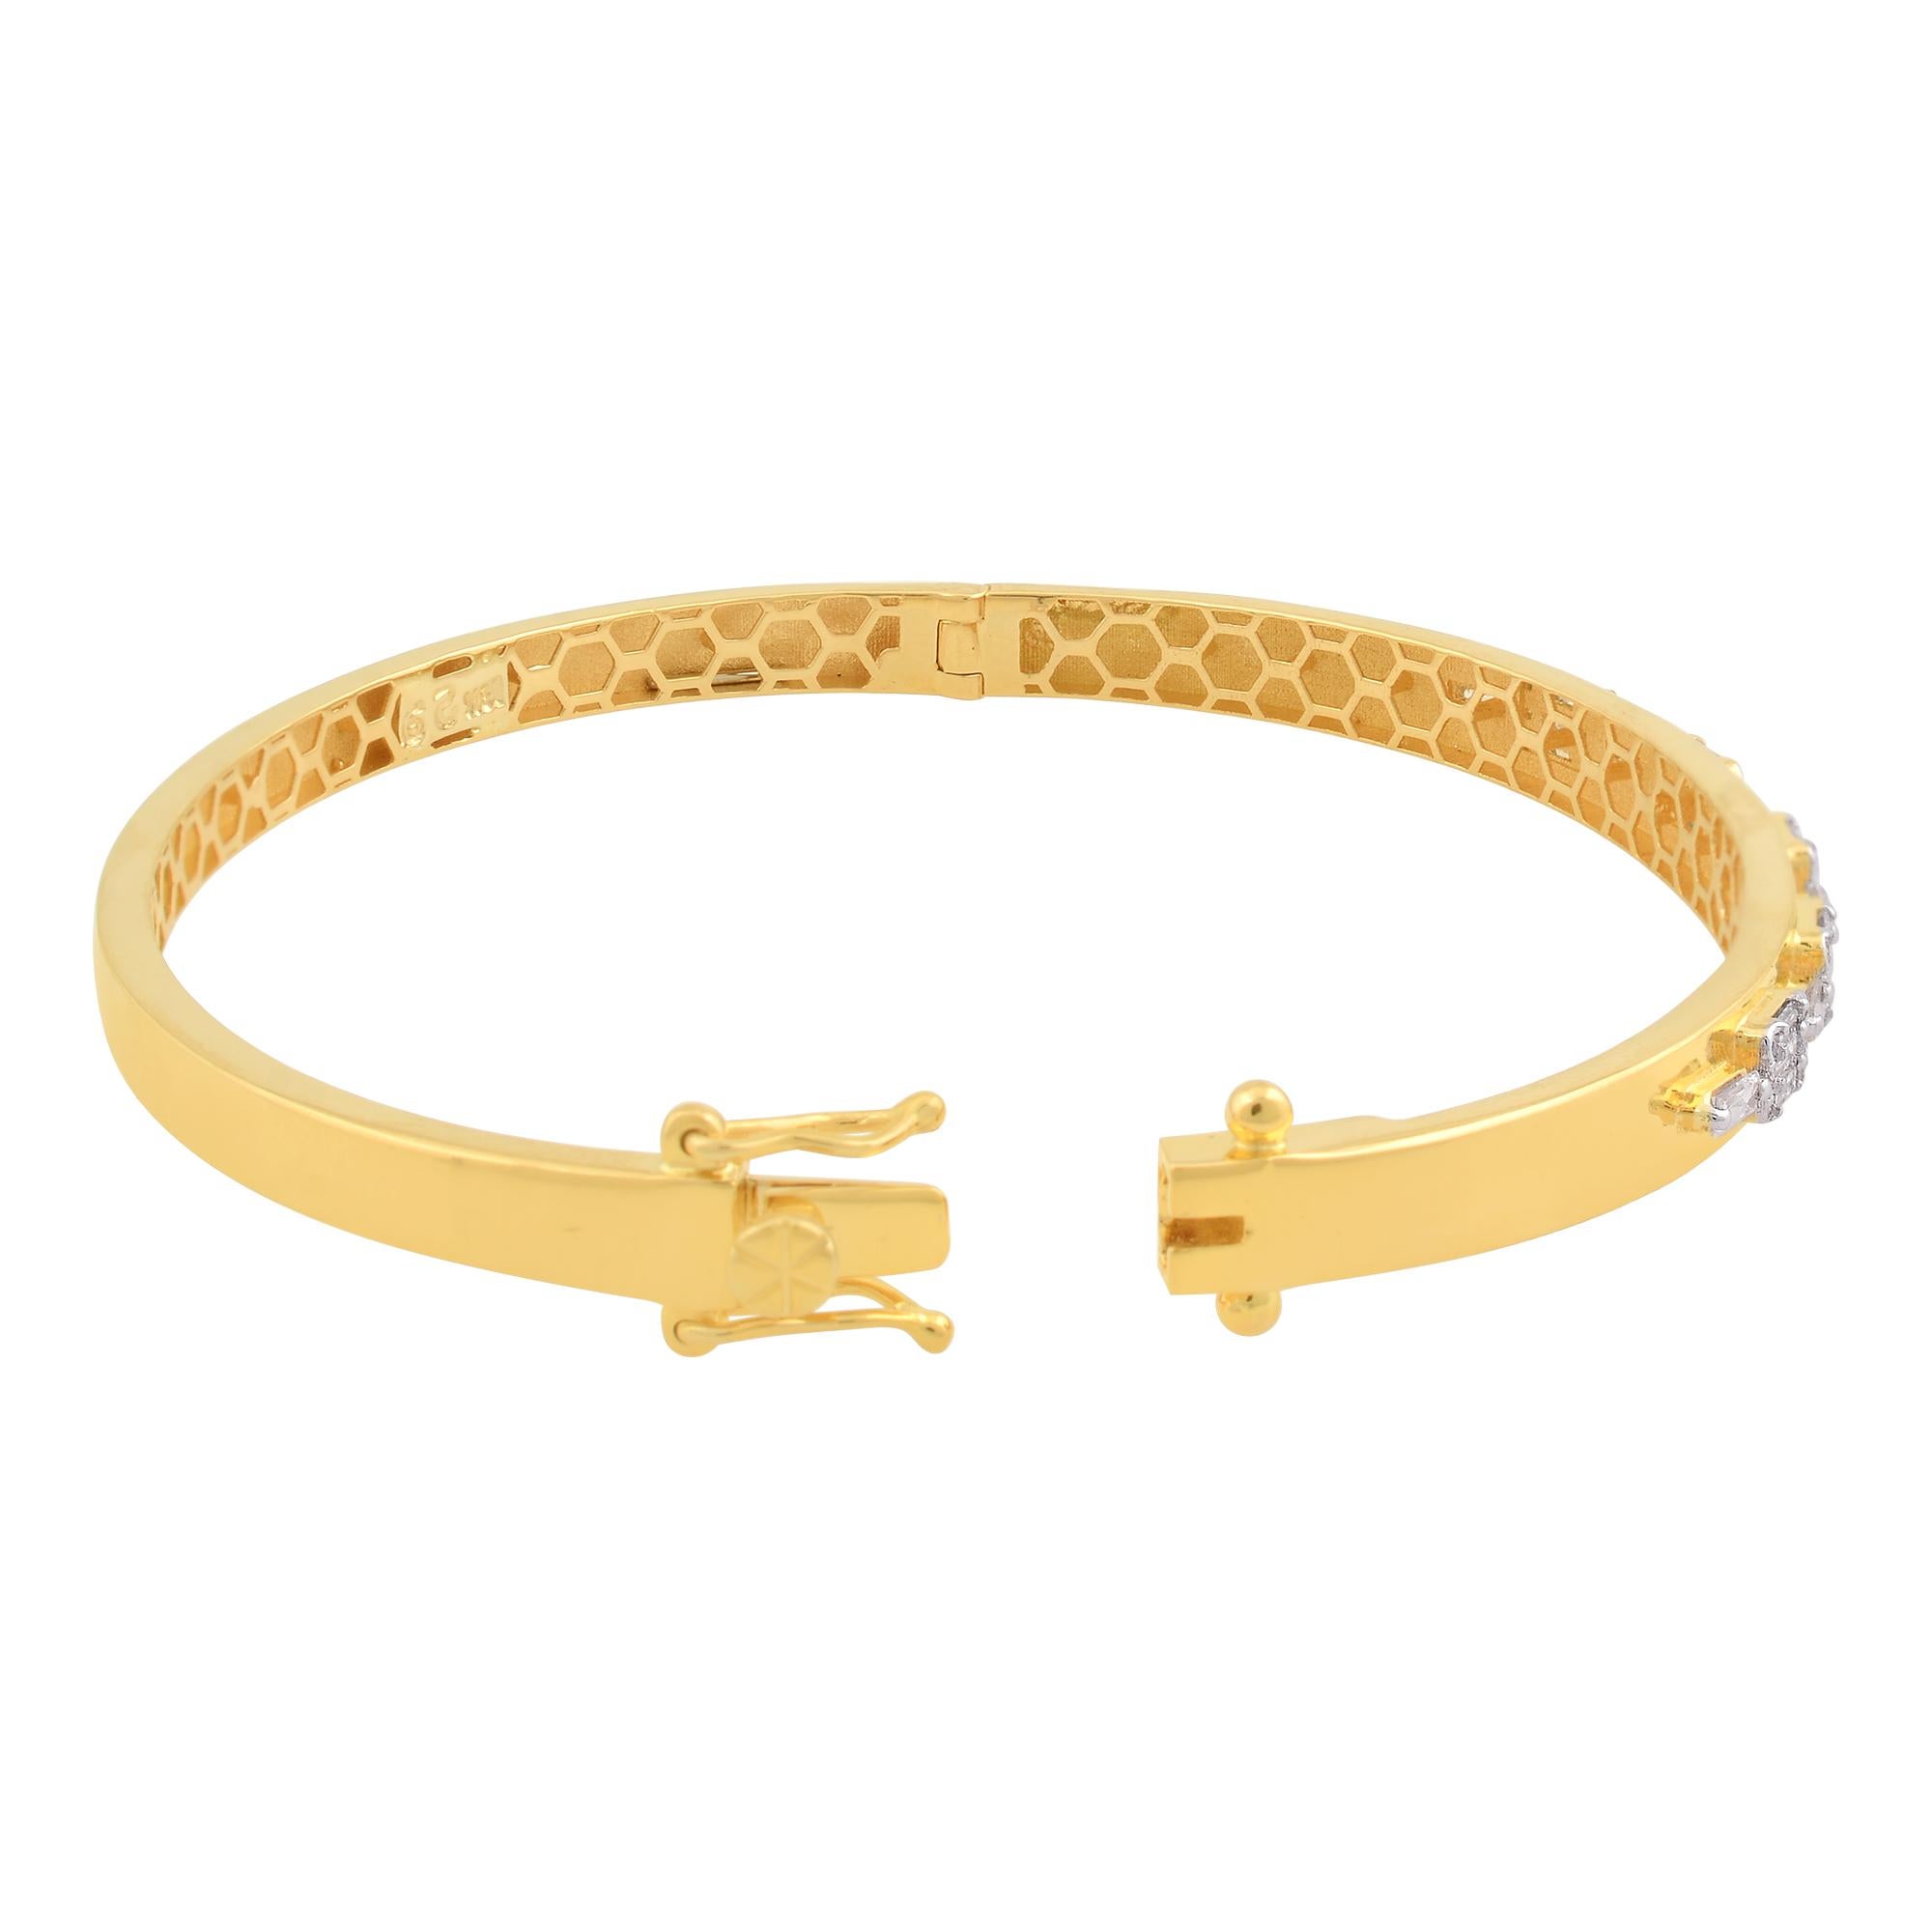 Crafted with precision and attention to detail, this Baguette Diamond Bangle Bracelet exemplifies the highest standards of craftsmanship and quality. Its enduring elegance makes it a cherished addition to any jewelry collection, destined to be